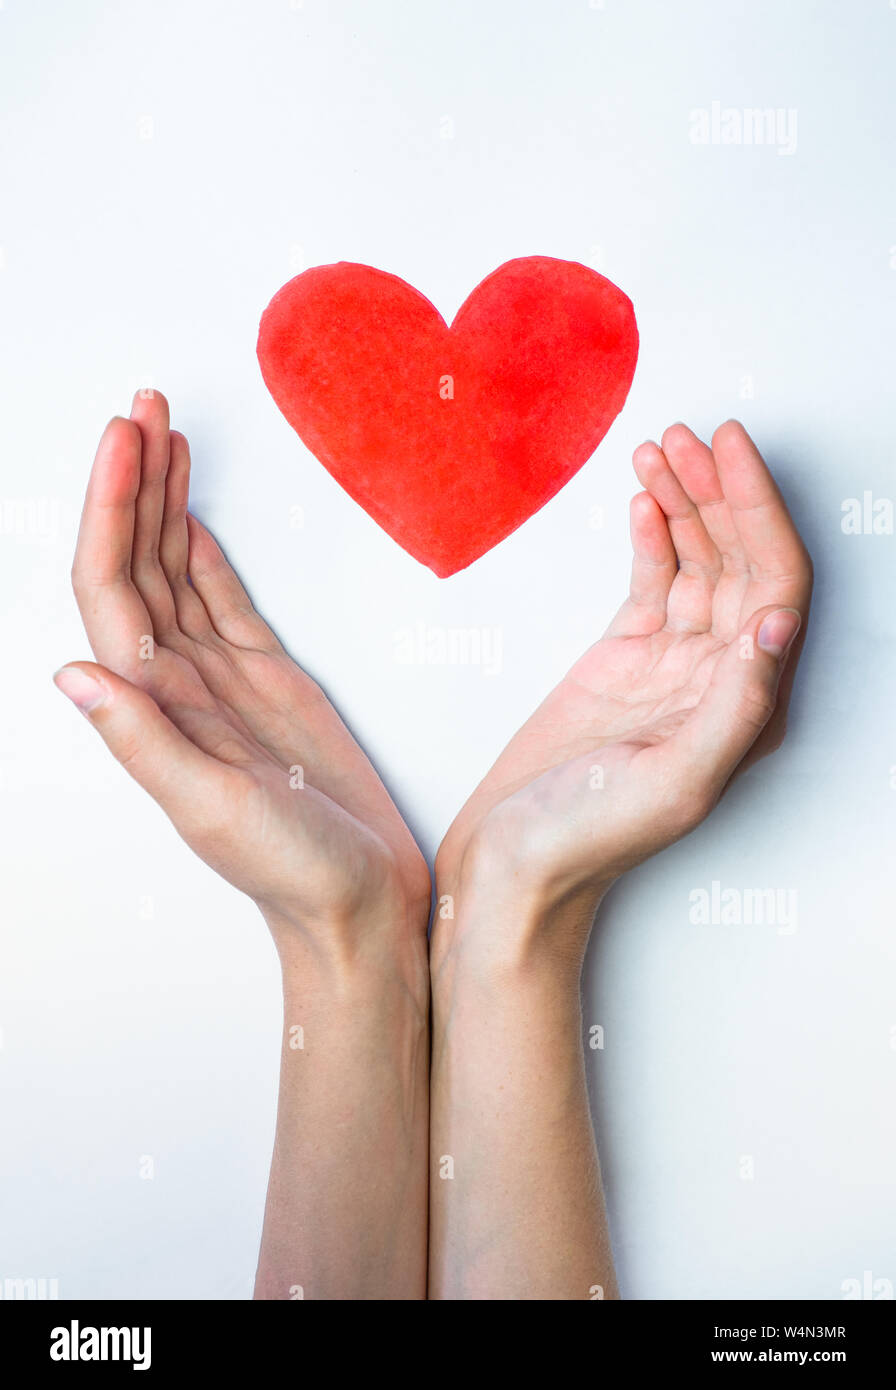 Heart sign drawn with a marker pen and hands embracing it. Concept of love, care and peace: shape of a heart resting safely in human palms. Stock Photo